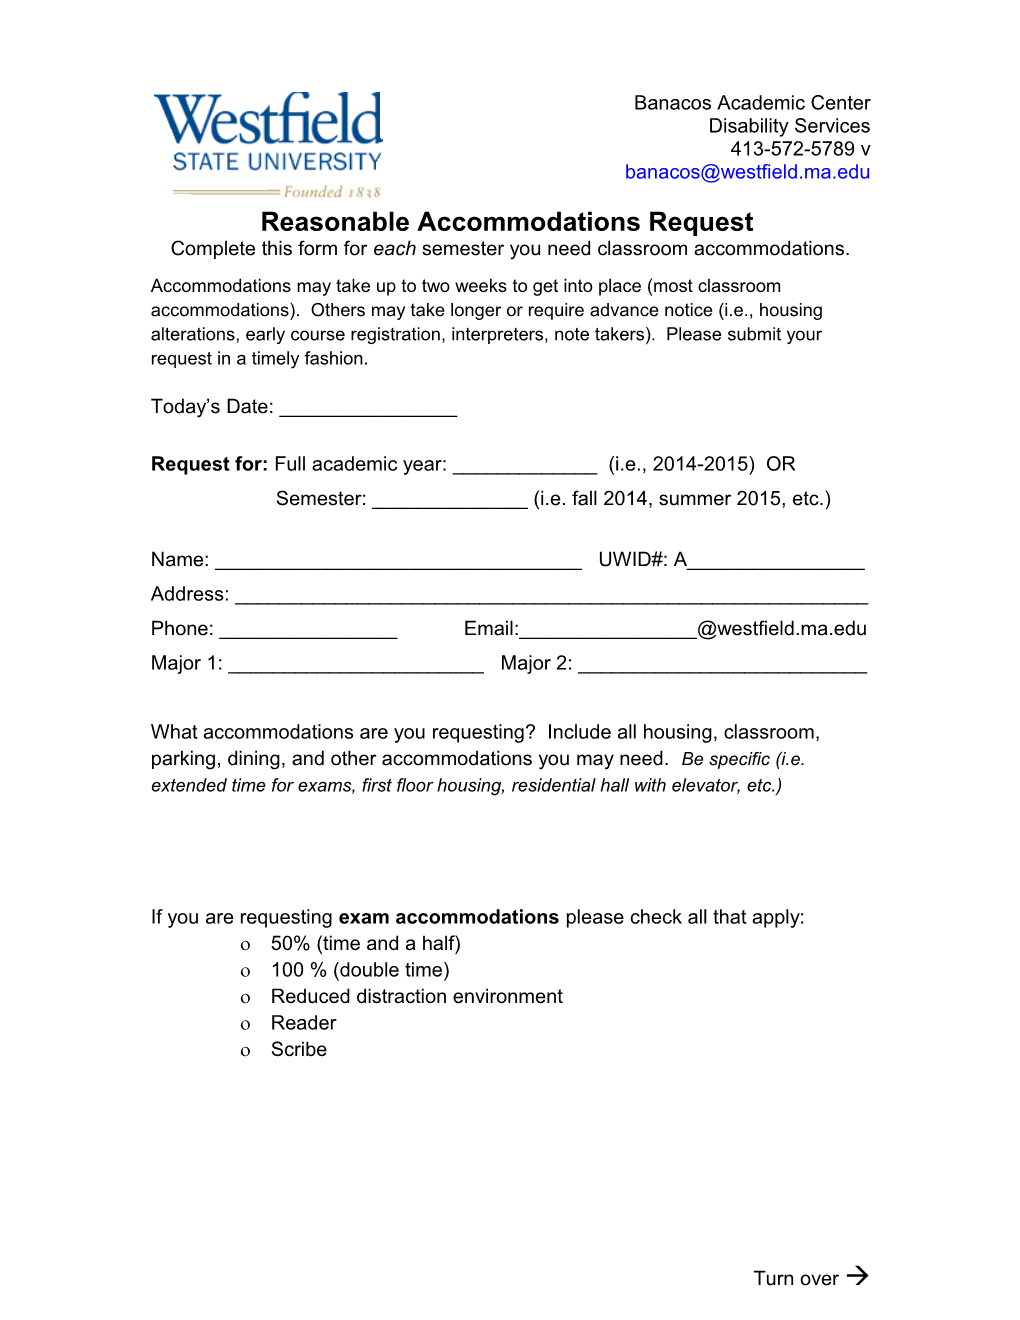 Complete This Form for Each Semester You Need Classroom Accommodations